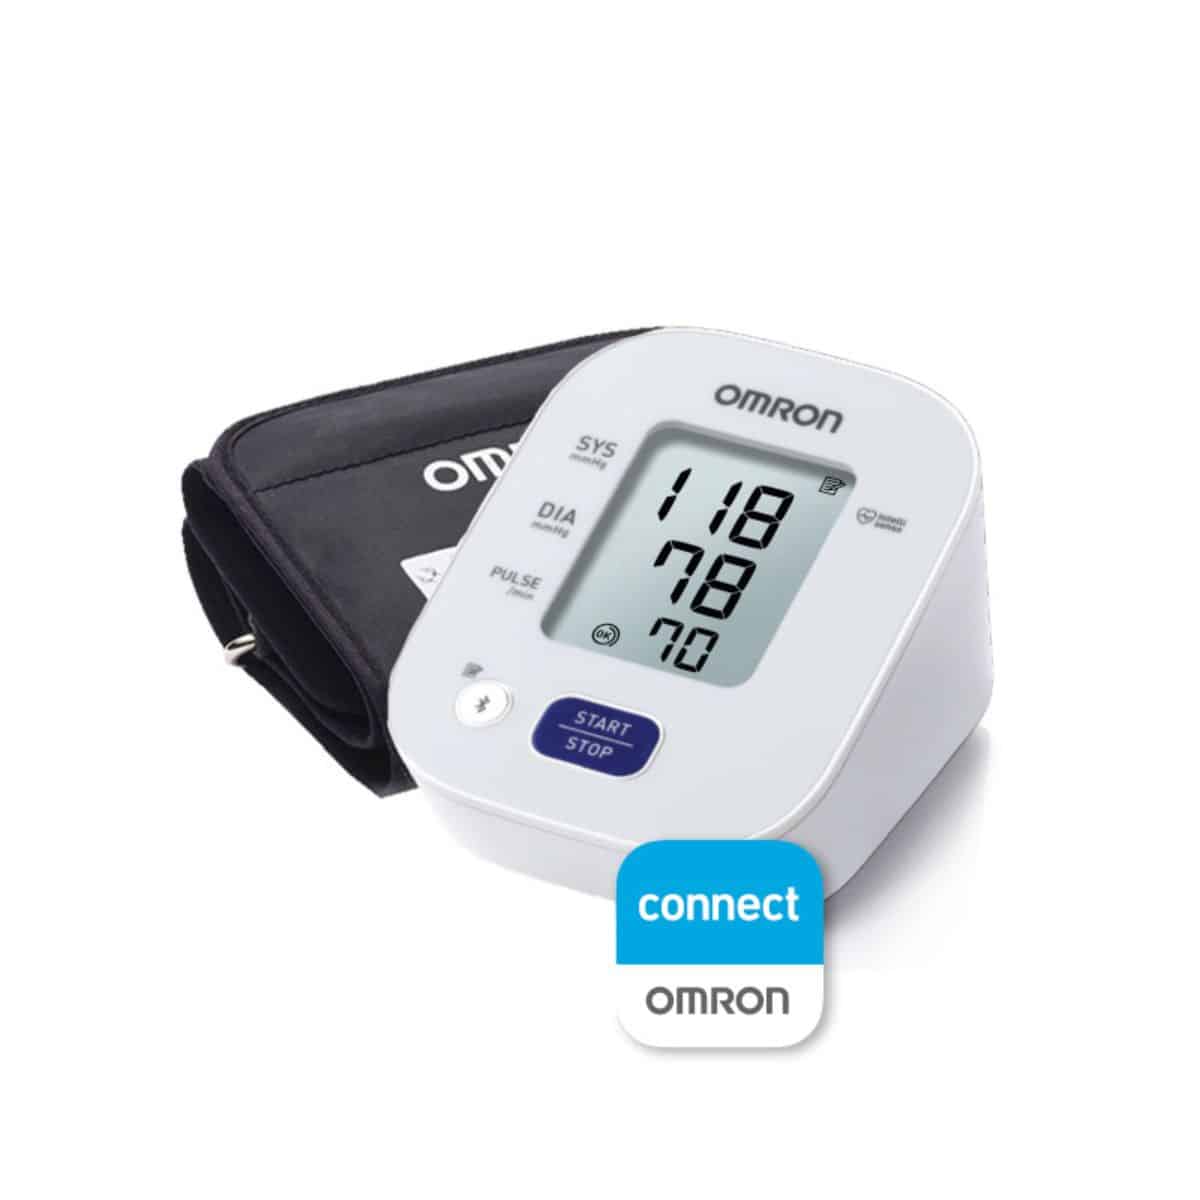 Omron 10 Series Wireless Upper Arm Blood Pressure Monitor - For Blood  Pressure - Irregular Heartbeat Detection, Hypertension Indicator, Bluetooth